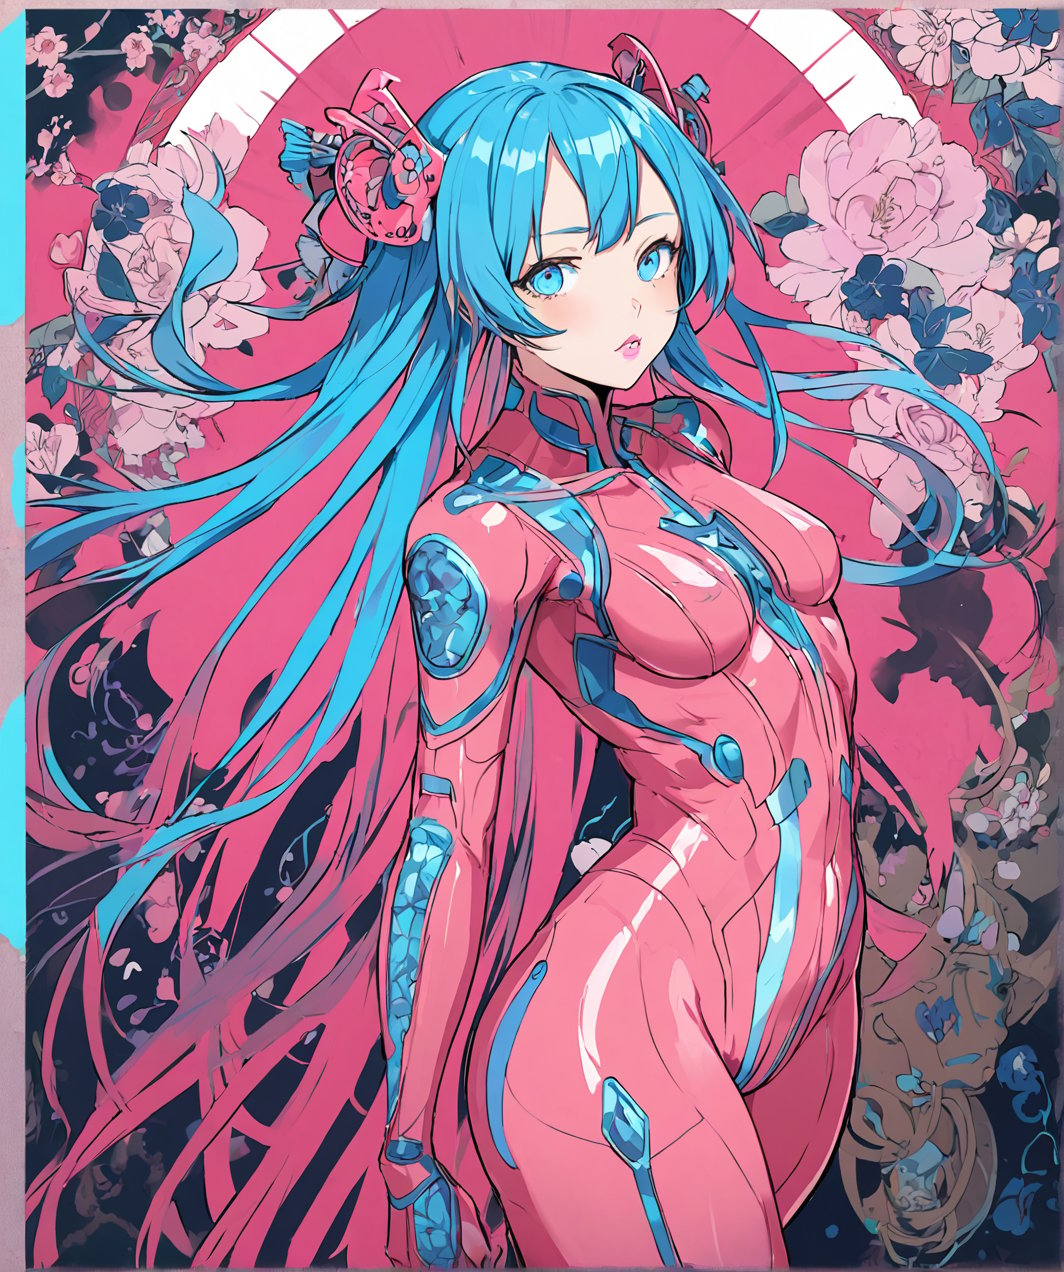 Side View. Indigenous anime girl perfect body and got very bright skin and blue long hair with blue eyes, glossy lips, from japan, the image should be full-body, with her attire being the traditional meg suit in tight super bright pink color. The image should be from head to waist knees. ,she stand beside the ritual place. wearing two piece neon pink meg suit, with Japanese tattoos. Draw in style by Makoto Shinkai and Ilya Kushinov, trending on Displate. com, iridescent Poster,Side View. Indigenous anime girl perfect body and got very bright skin and blue long hair with blue eyes, glossy lips, from japan, the image should be full-body, with her attire being the traditional meg suit in tight super bright pink color. The image should be from head to waist knees. ,she stand beside the ritual place. wearing two piece neon pink meg suit, with Japanese tattoos. Draw in style by Makoto Shinkai and Ilya Kushinov, trending on Displate. com, iridescent Poster.